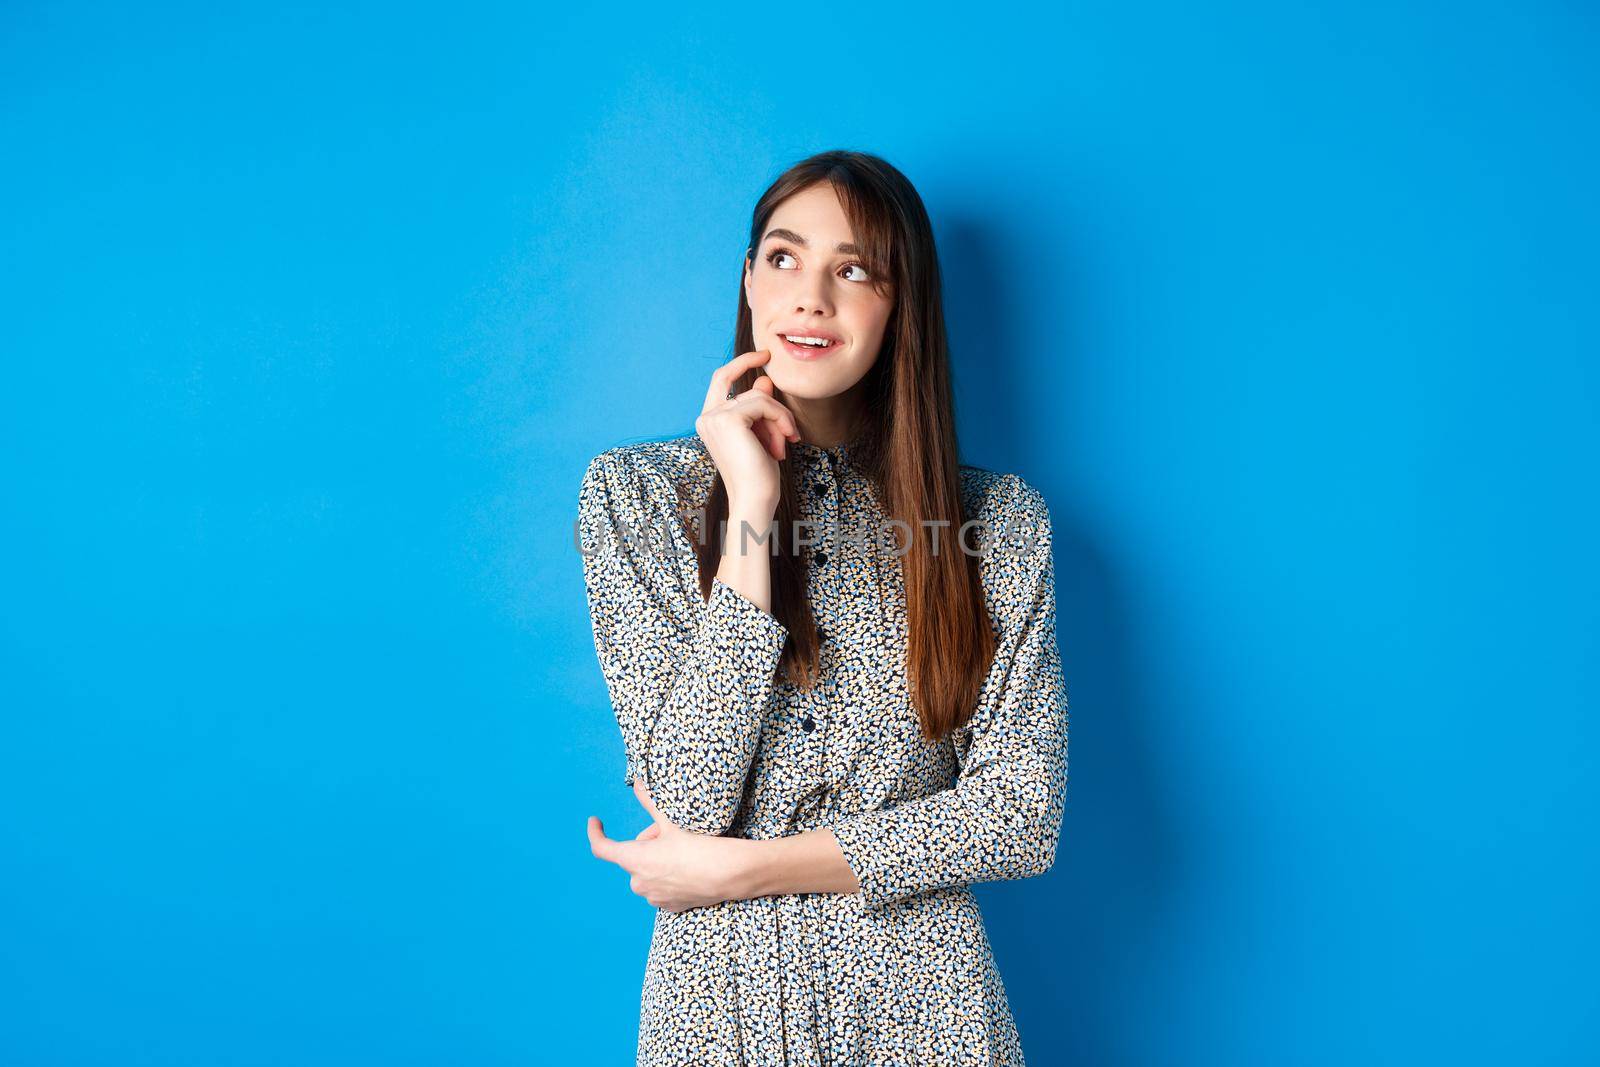 Creative young woman imaging and smiling, looking at upper left logo thoughtful, having an idea, standing on blue background in dress.